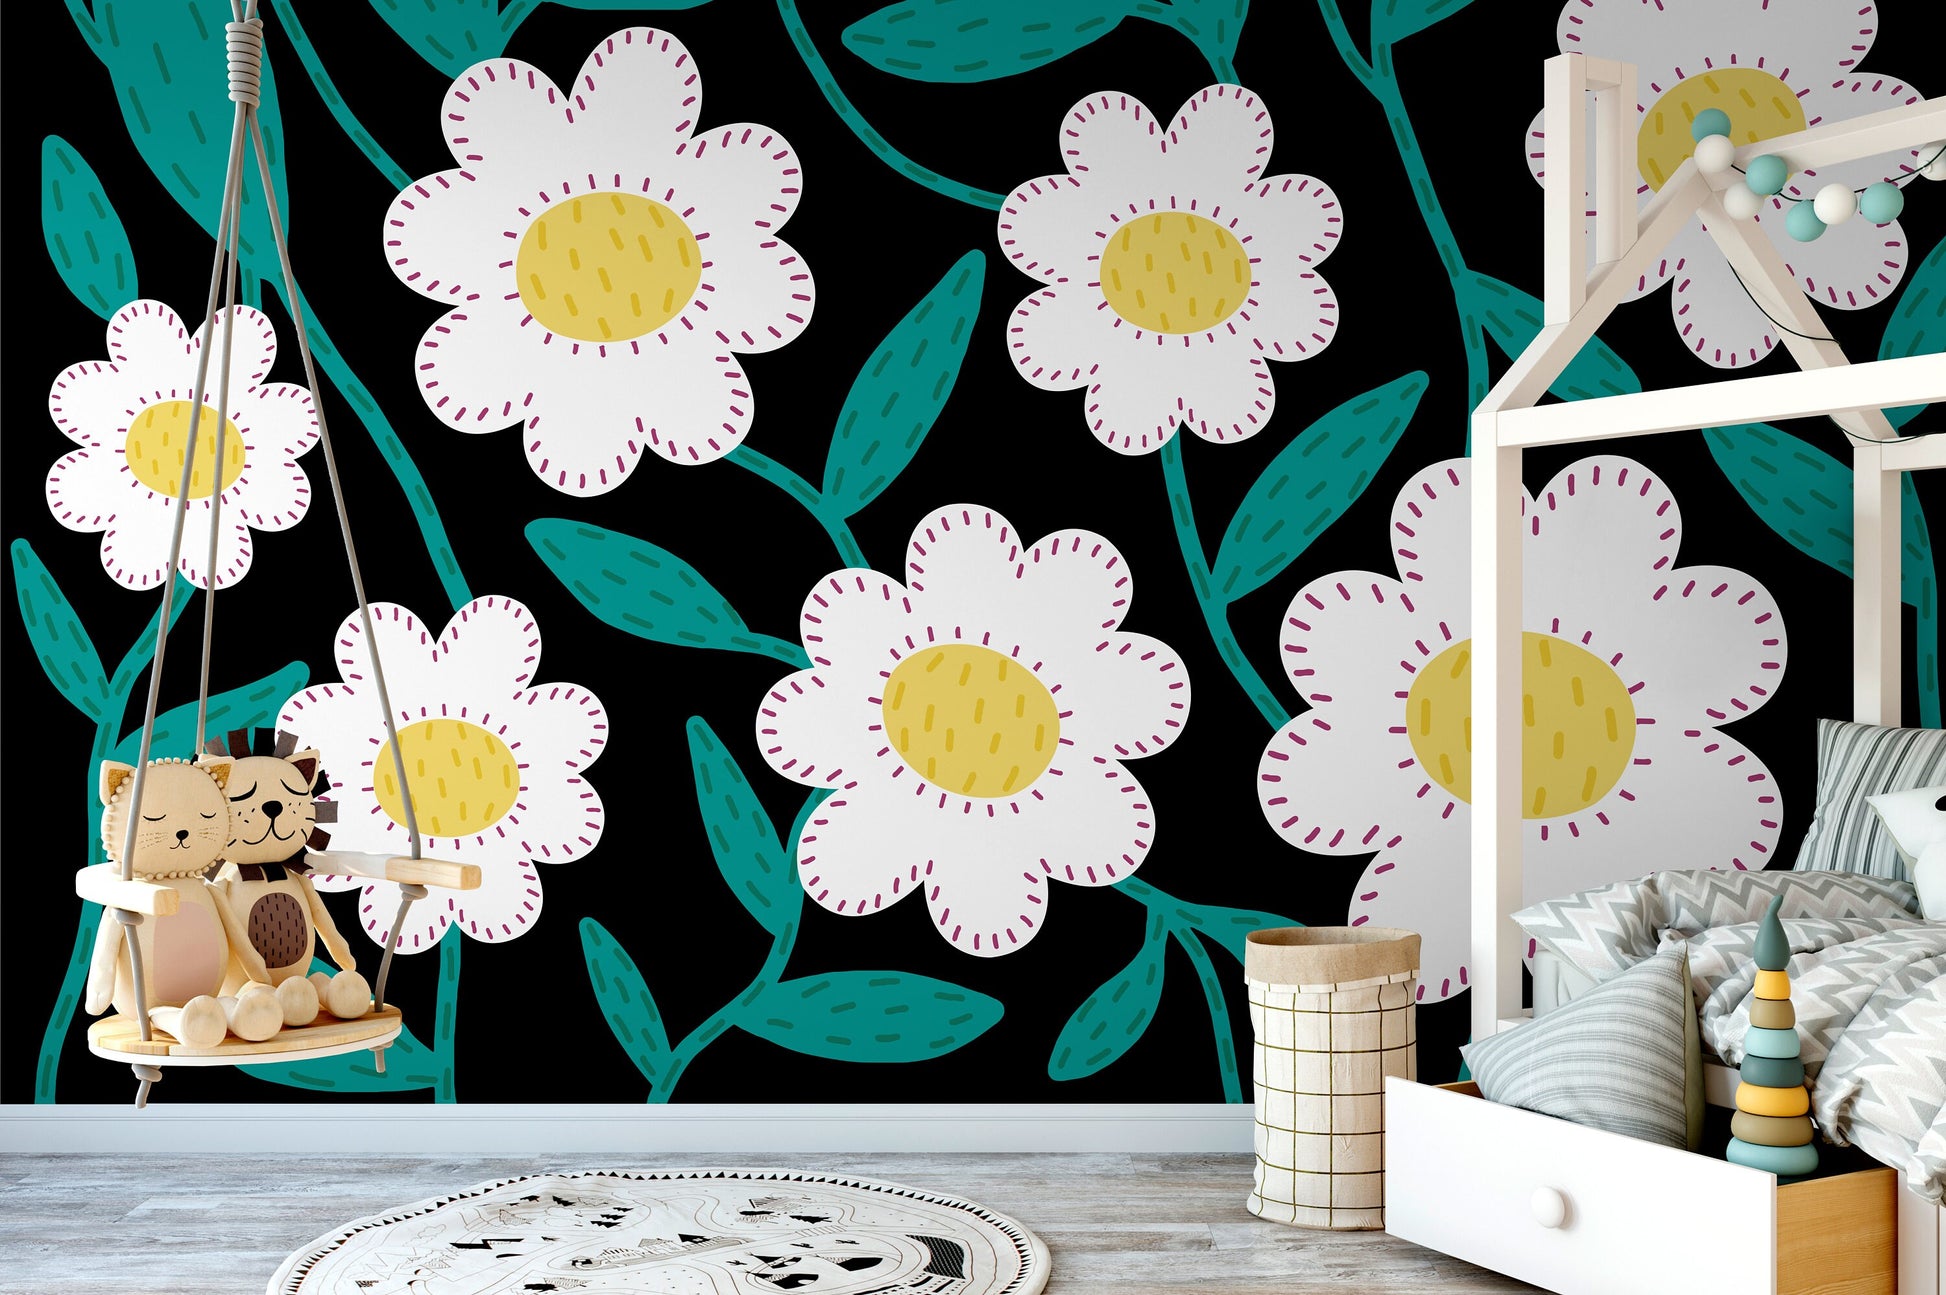 Wallpaper Peel and Stick Wallpaper Removable Wallpaper Home Decor Wall Art Wall Decor Room Decor / Daisy Floral Wallpaper - C472